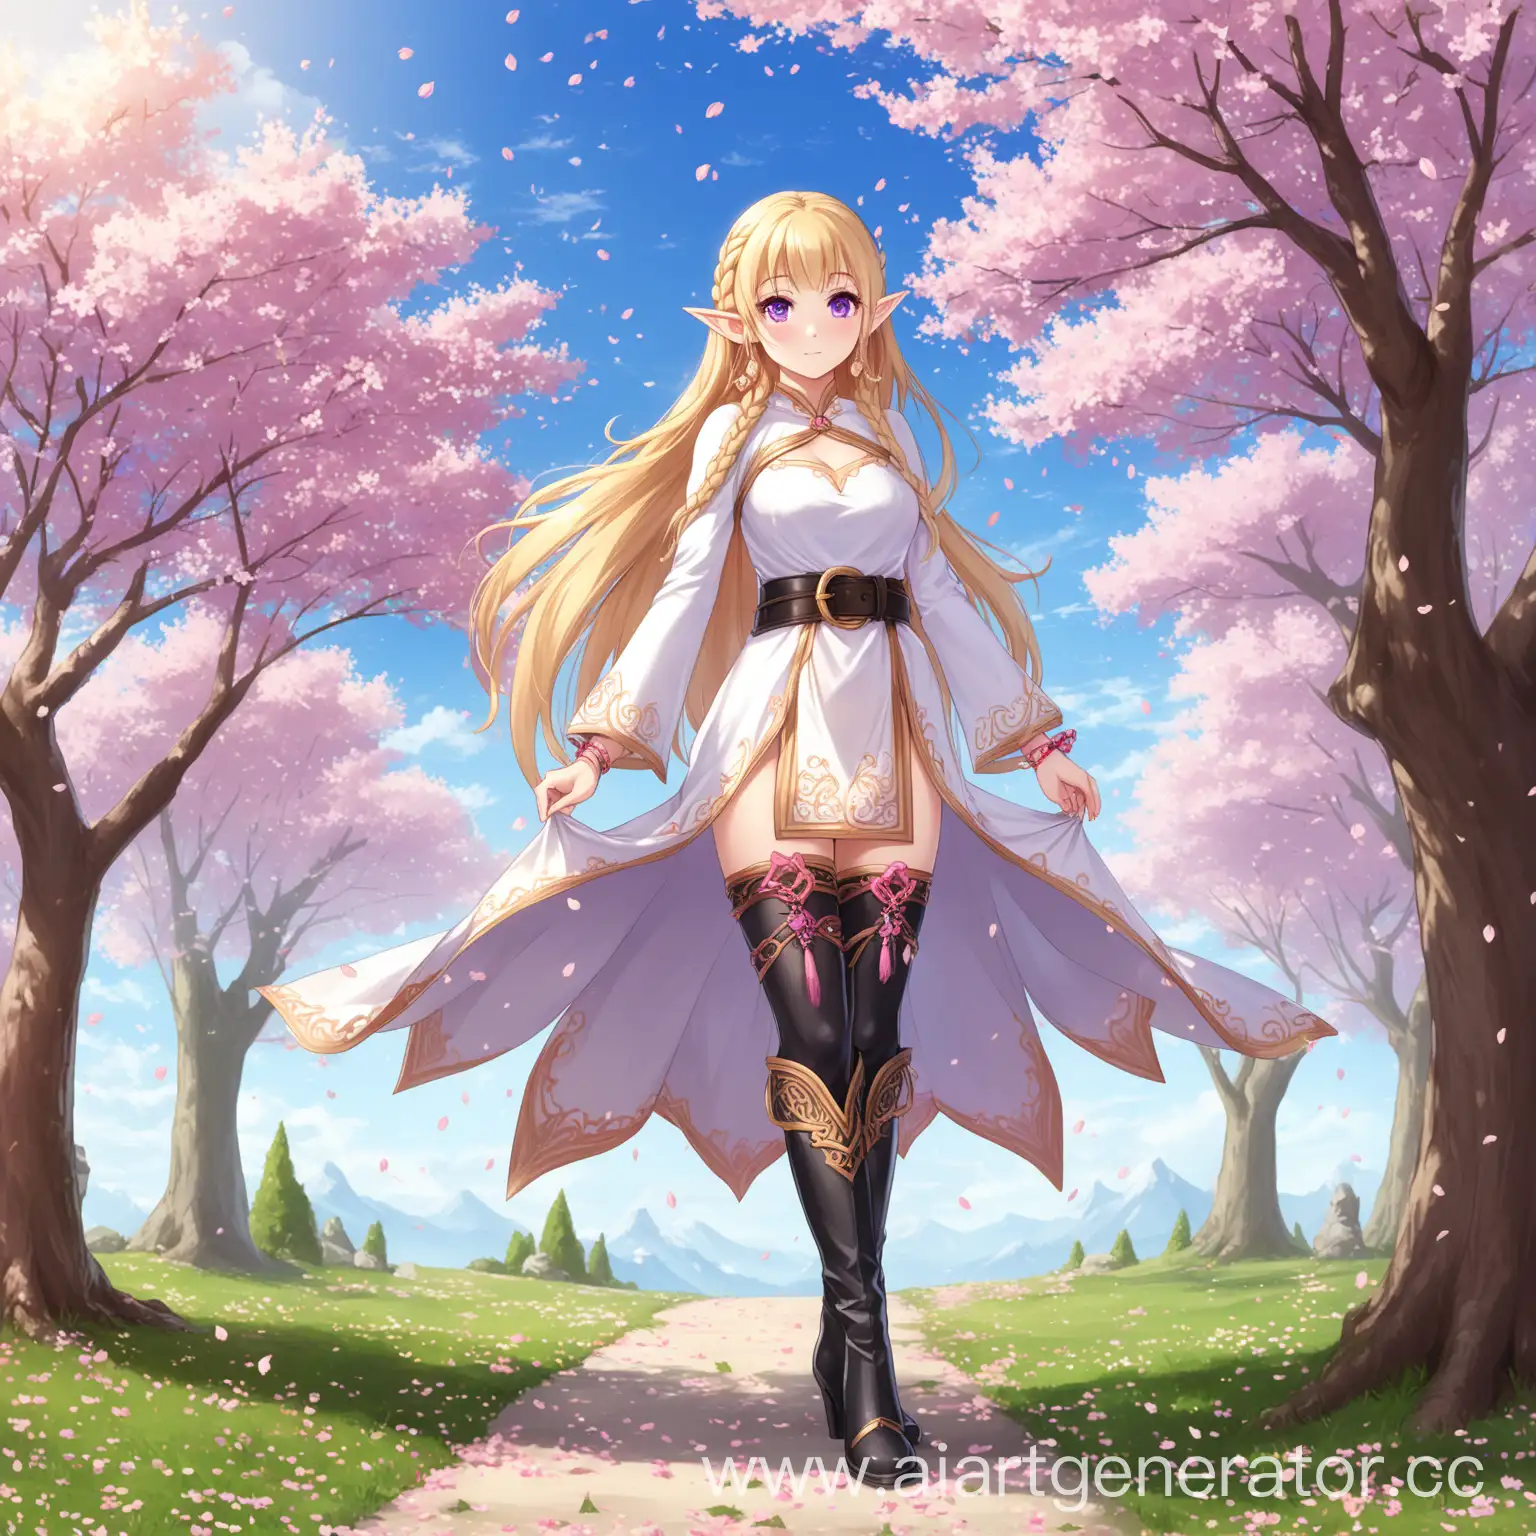 Elf-Girl-with-Long-Blonde-Hair-and-Purple-Eyes-Standing-Among-Cherry-Blossoms